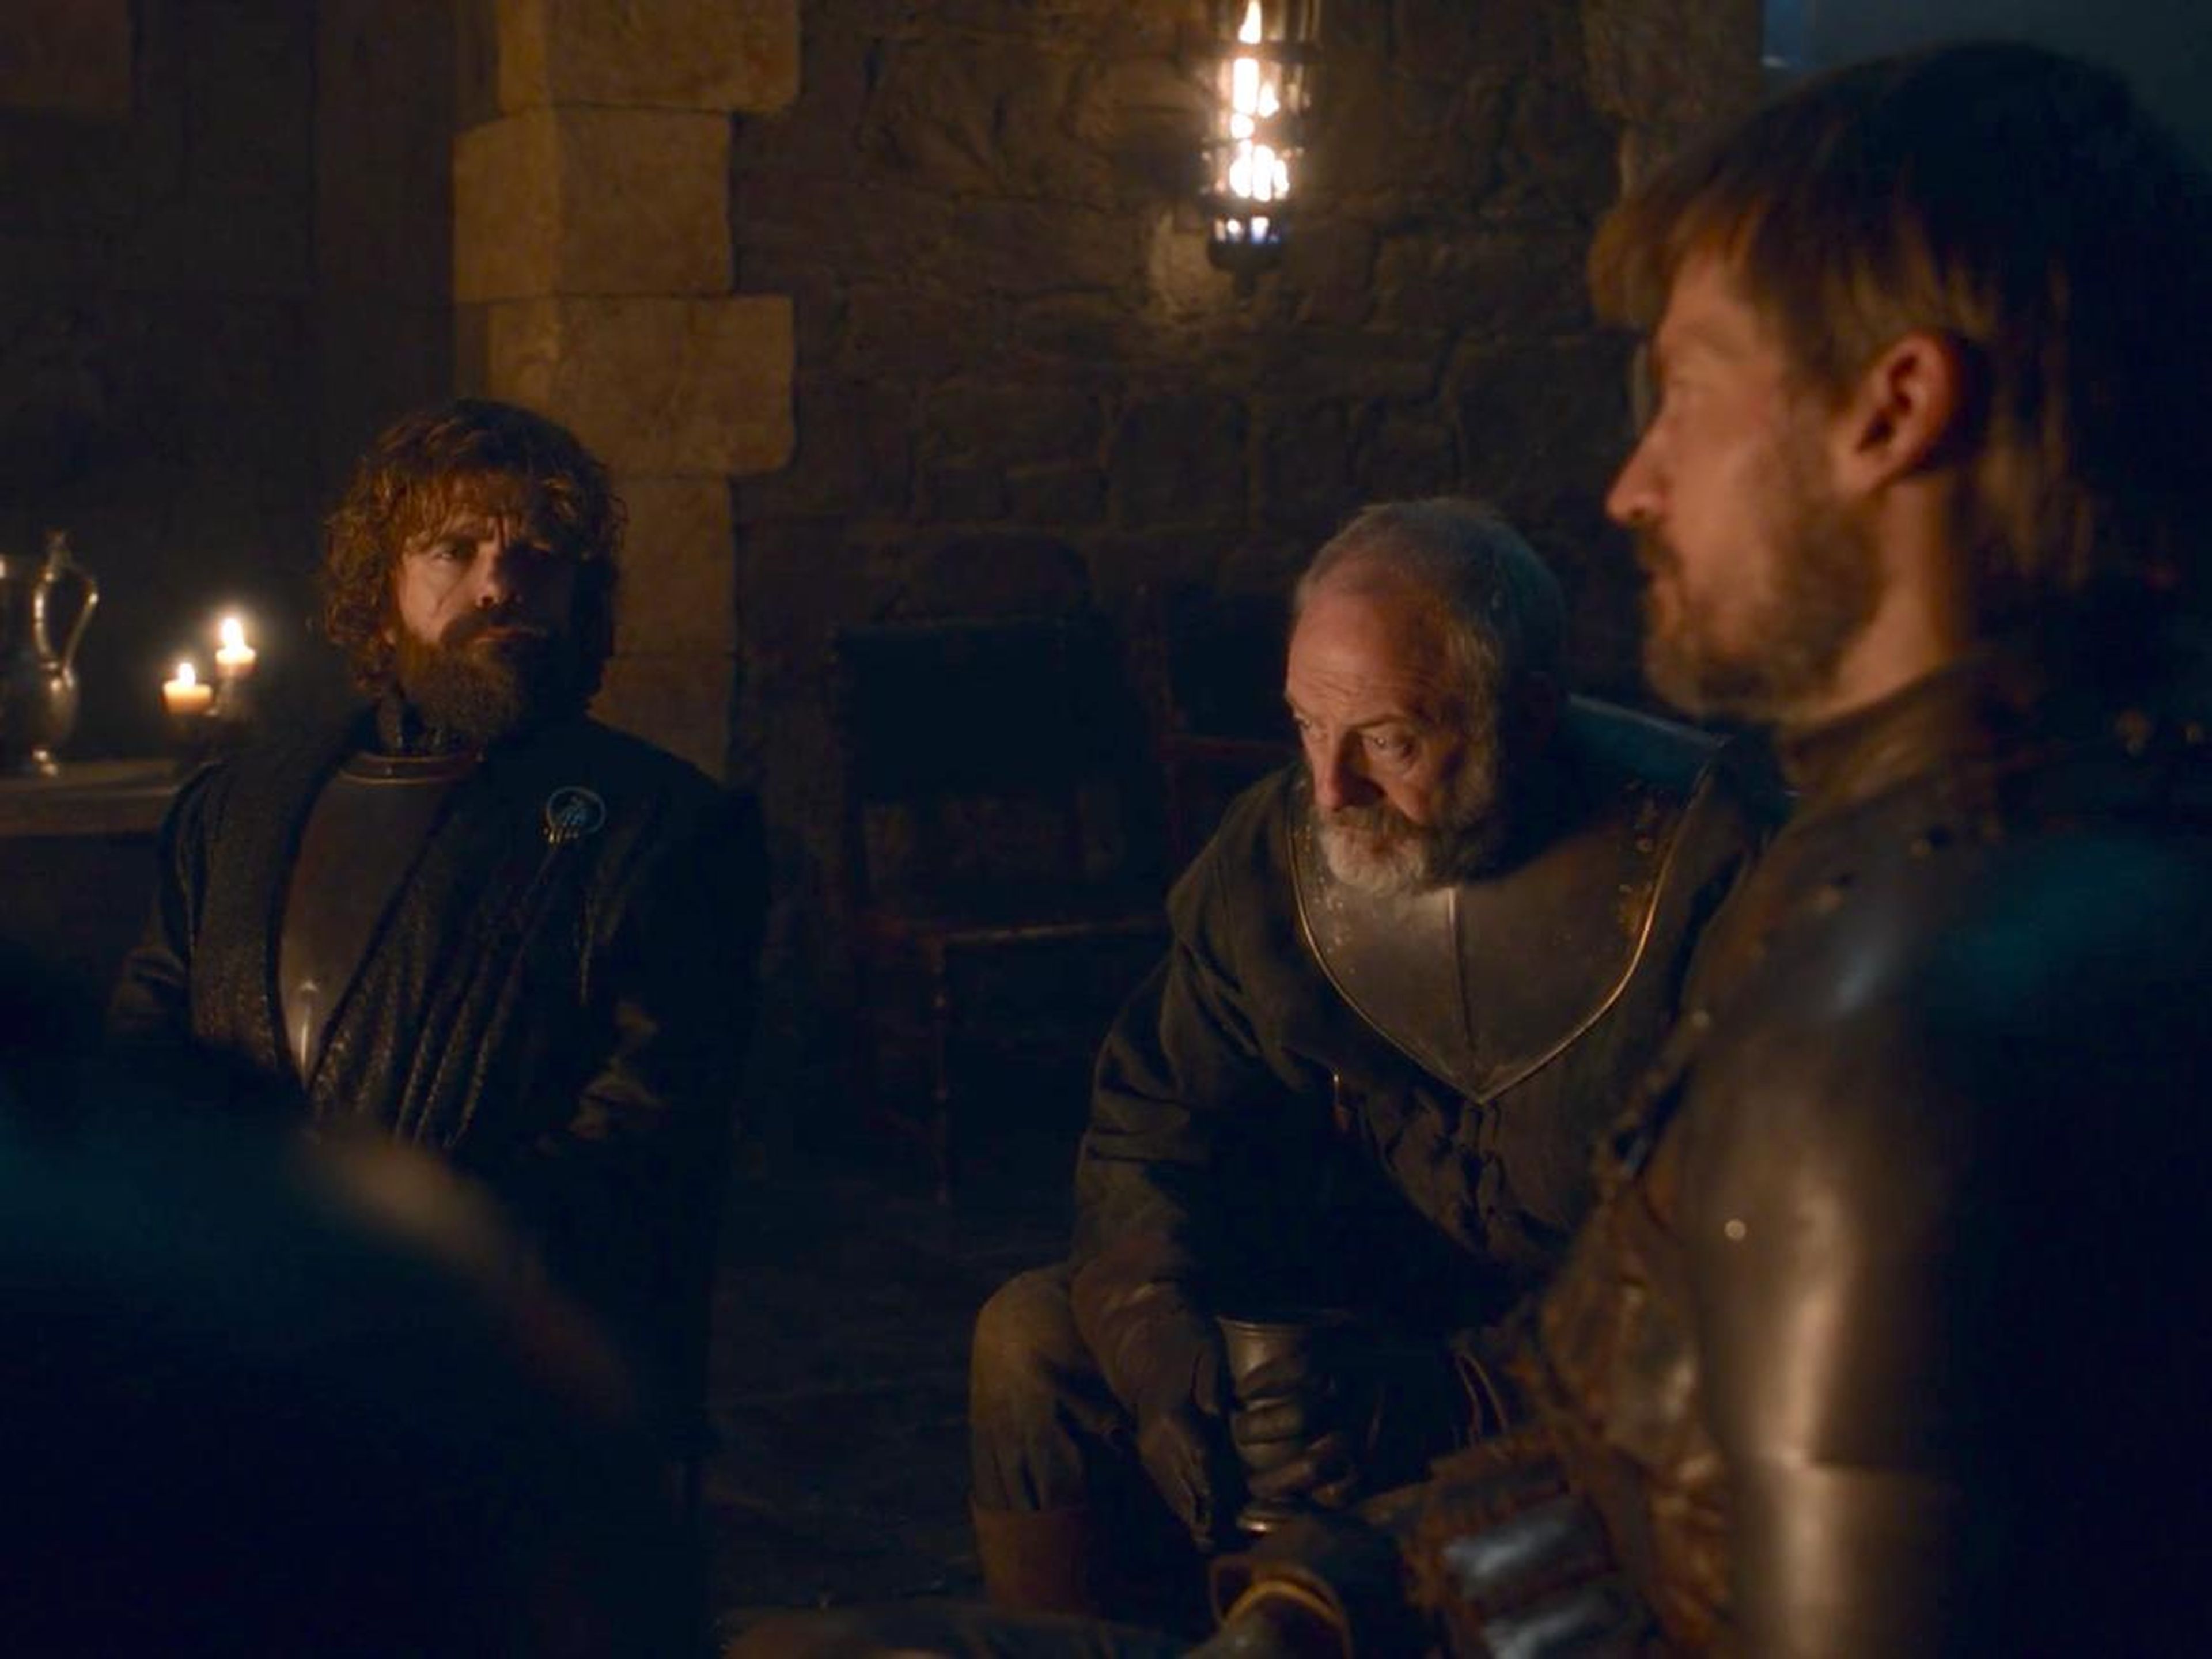 Tyrion, Davos, and Jaime together by the fire.